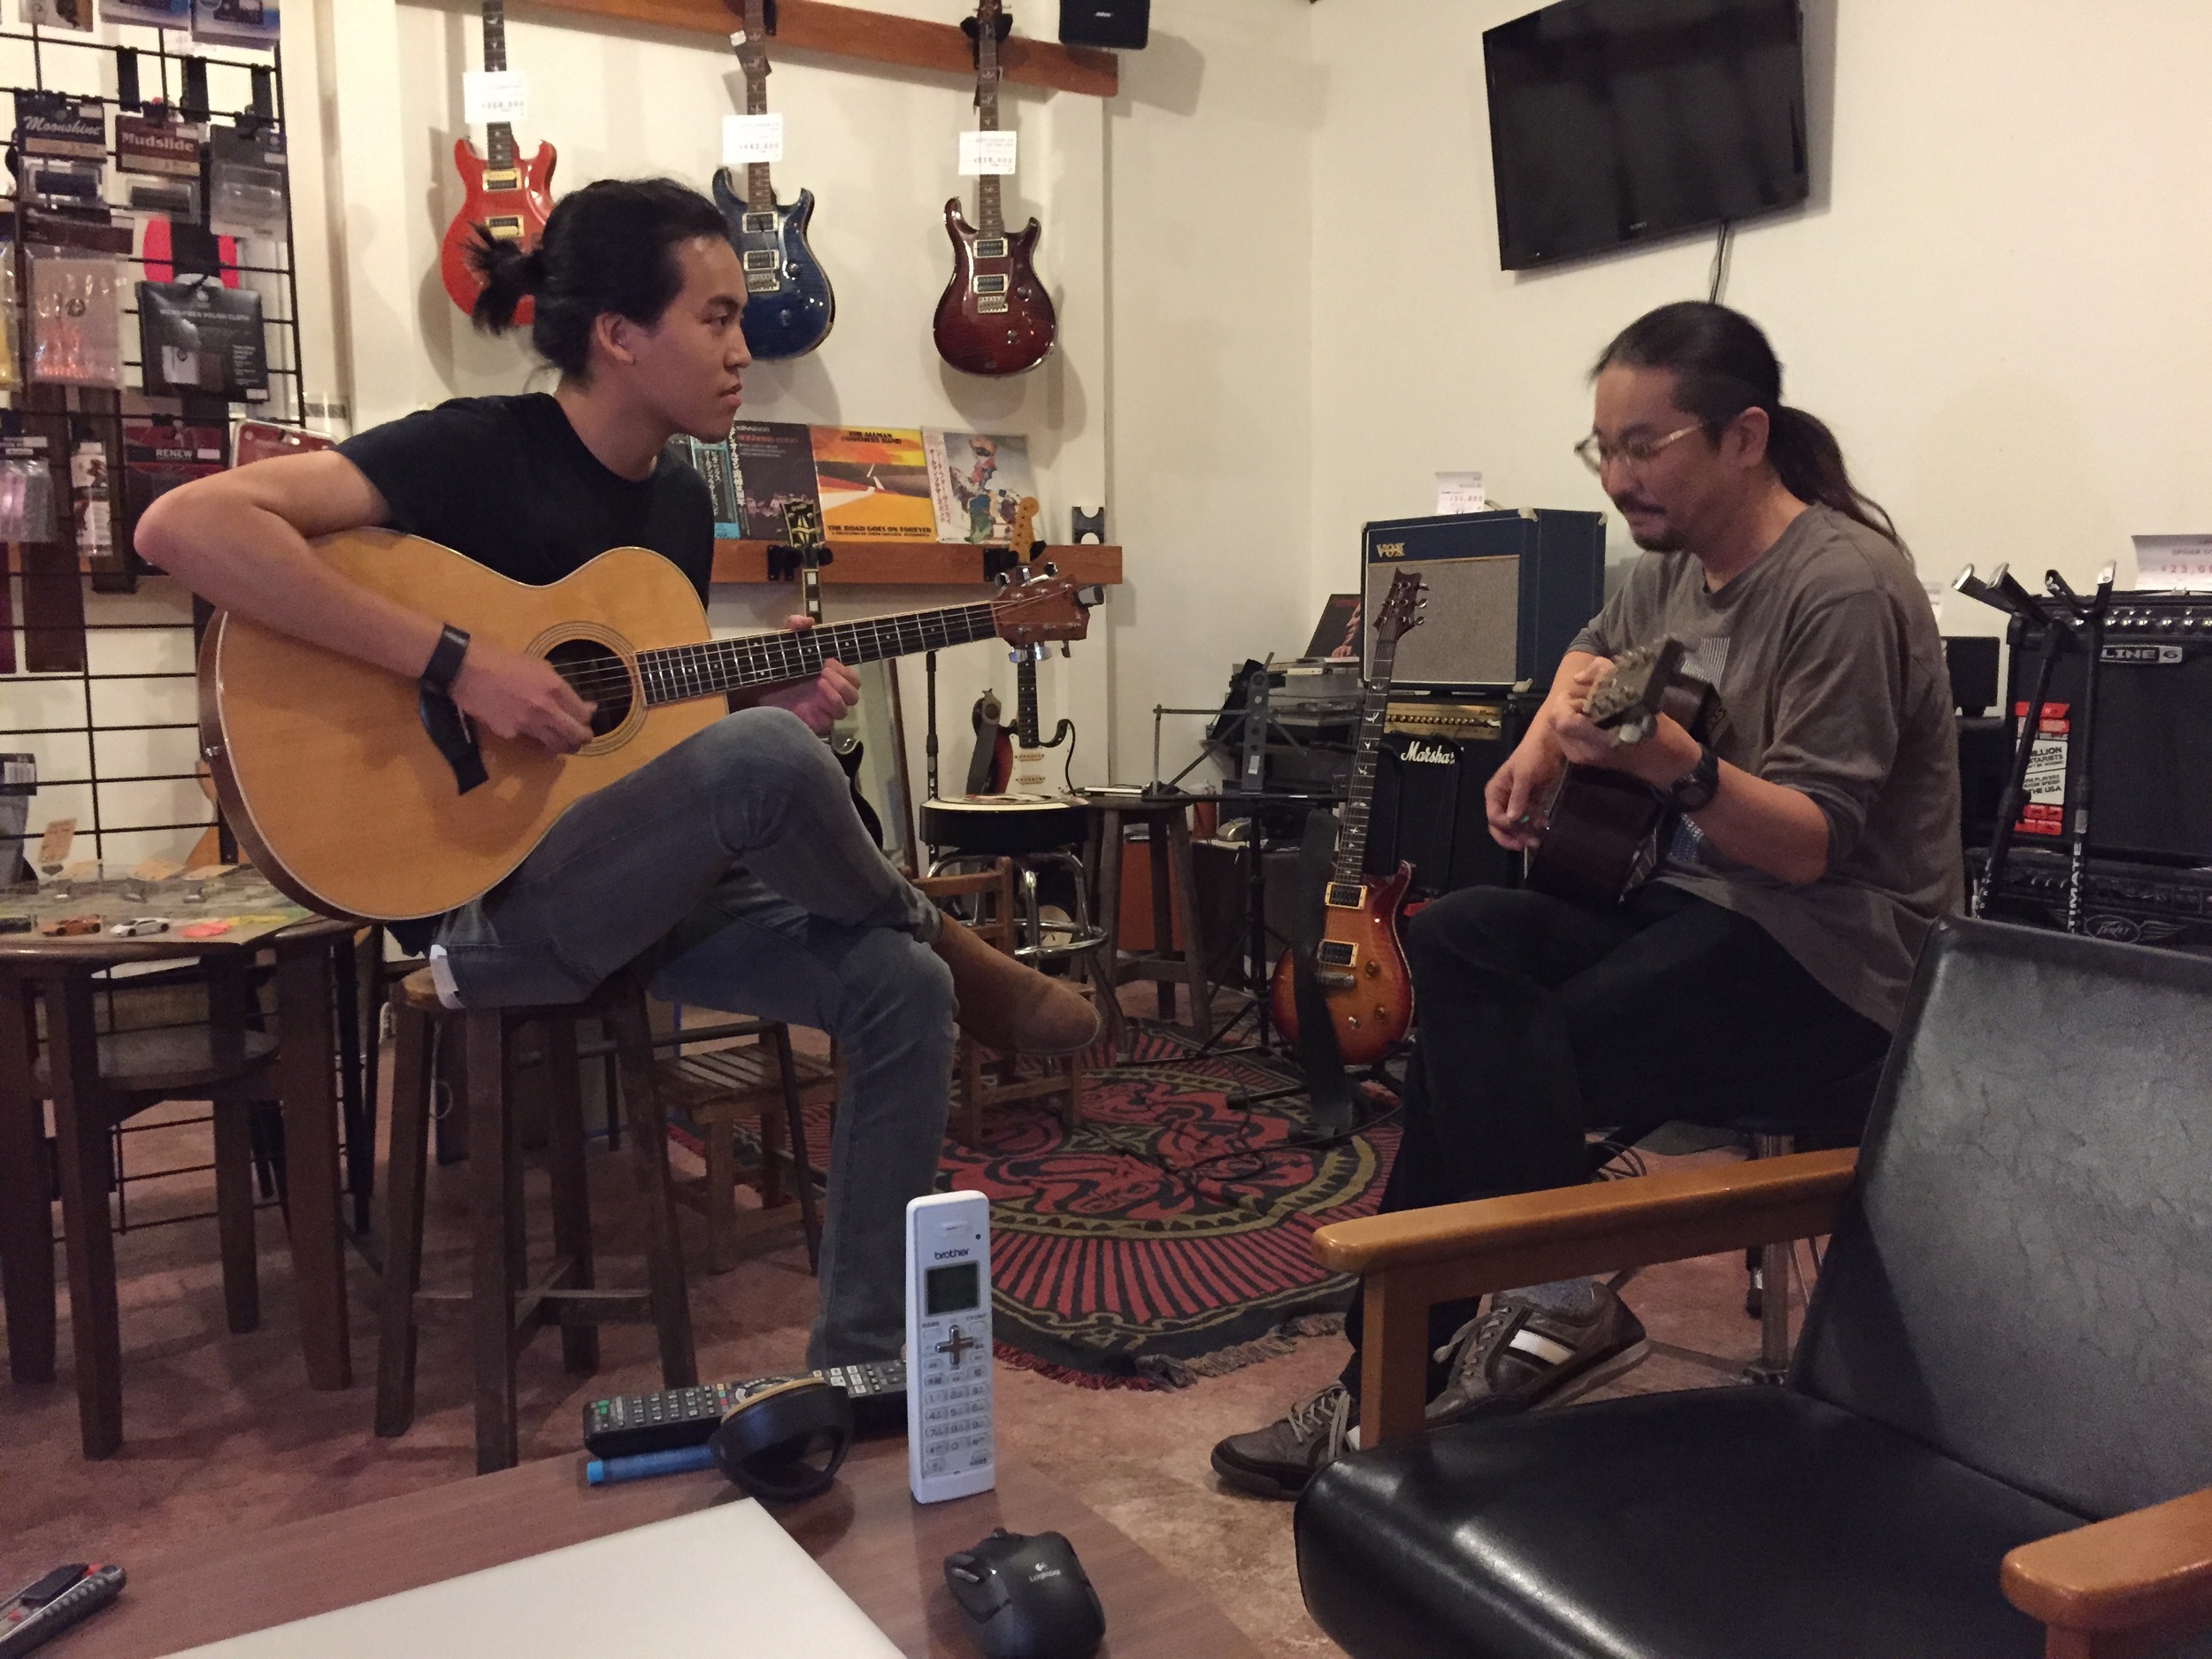 Jamming with a local guitar shop owner after a day of filming in Japan